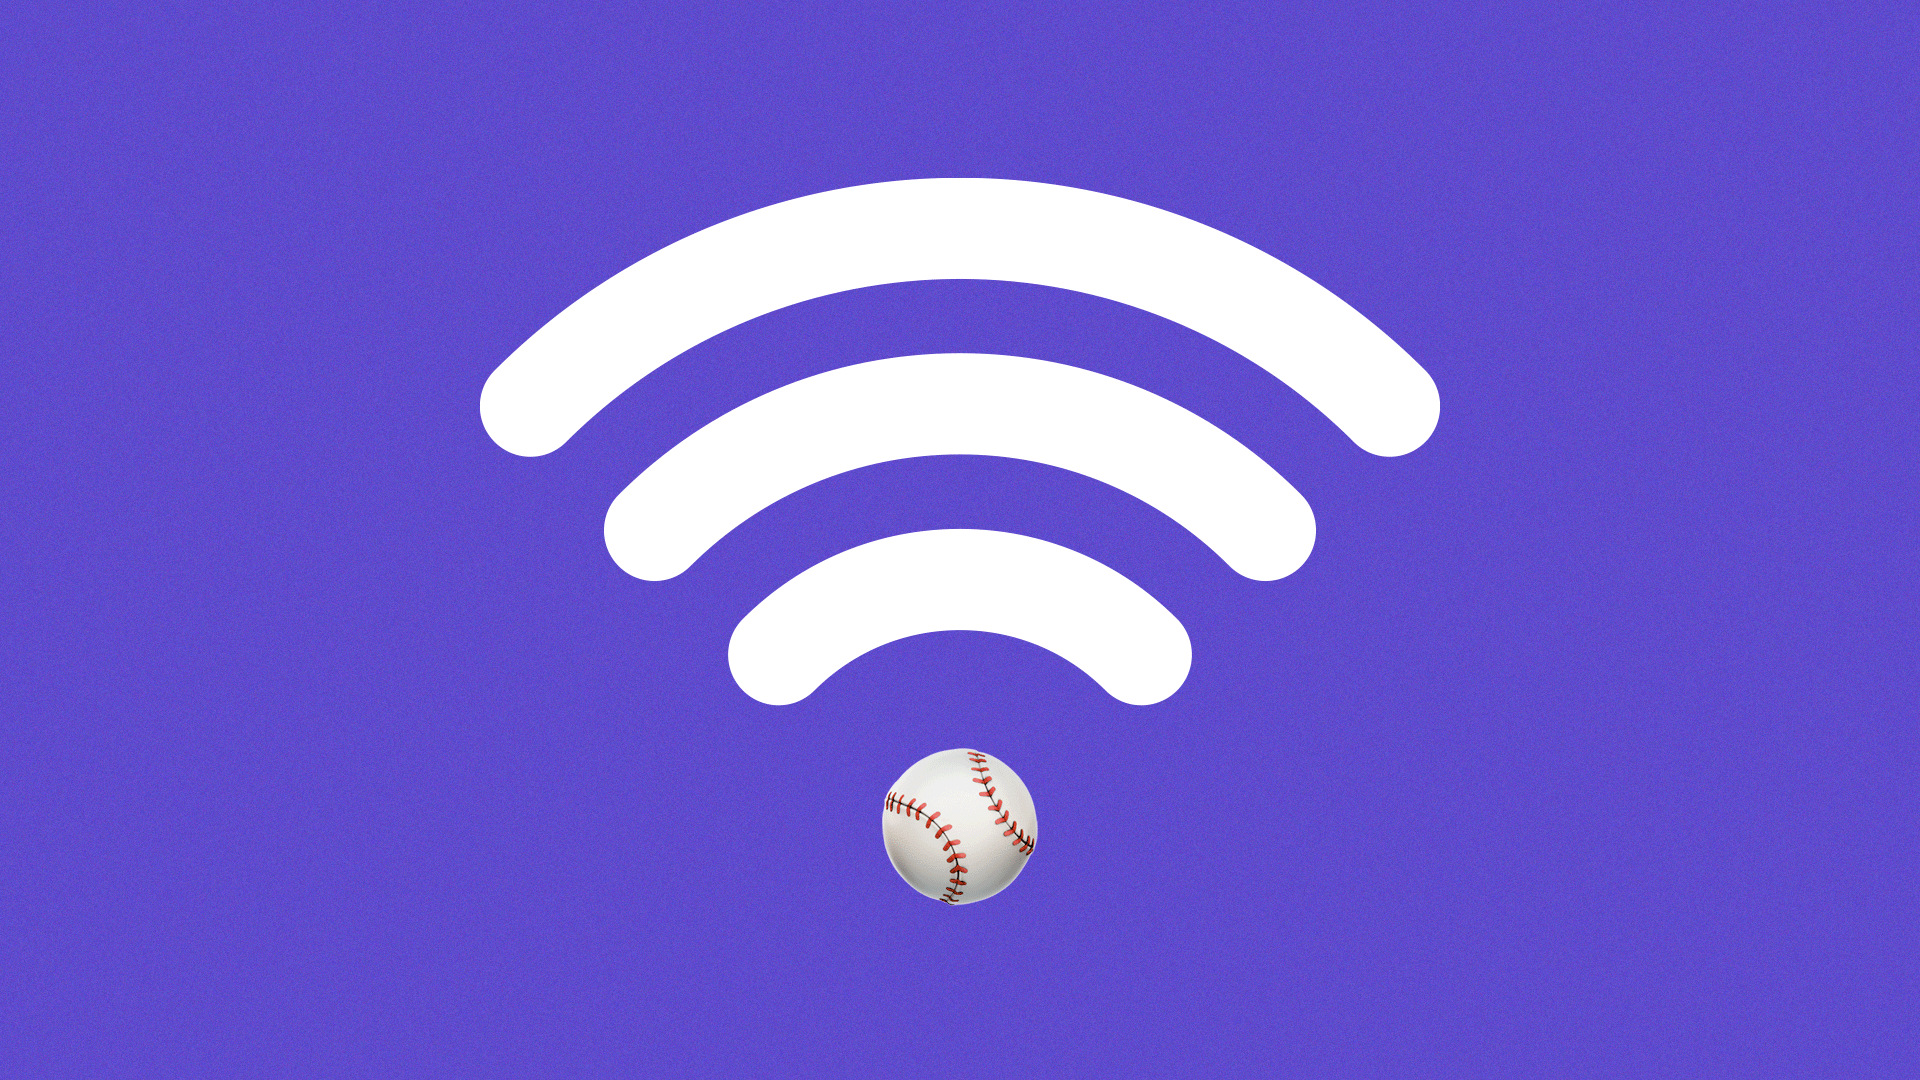 Animated illustration of a WiFi icon with various sports balls as the bottom dot. 